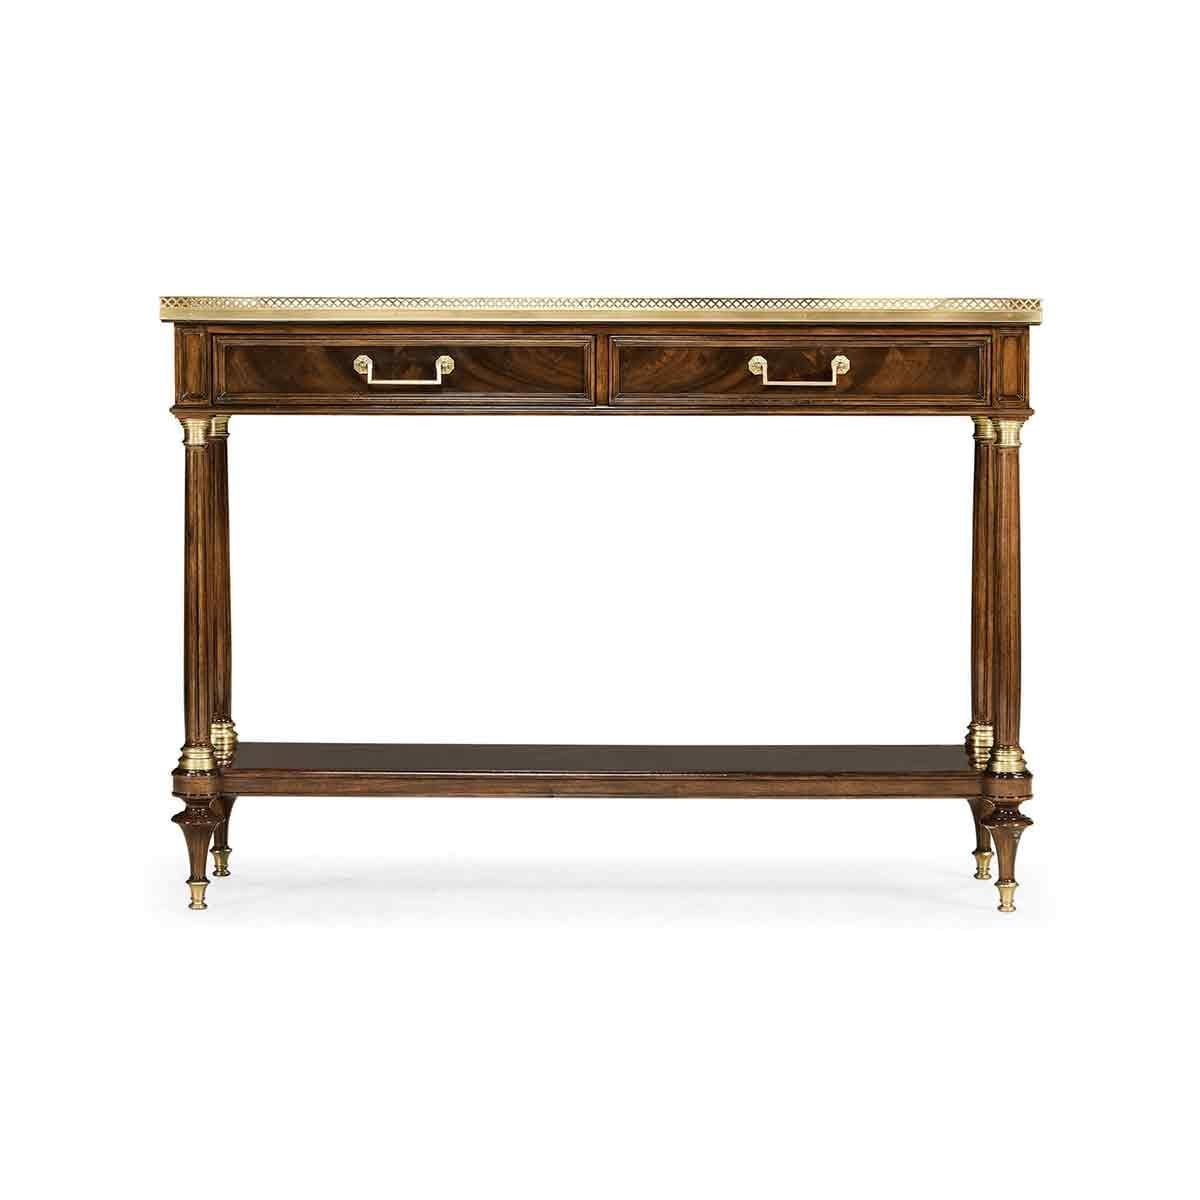 French Louis XVI mahogany console desserté with pierced brass gallery, two drawers, raised turned and fluted legs with shelf stretcher base and turned toupee feet on brass caps.

Dimensions: 53.87